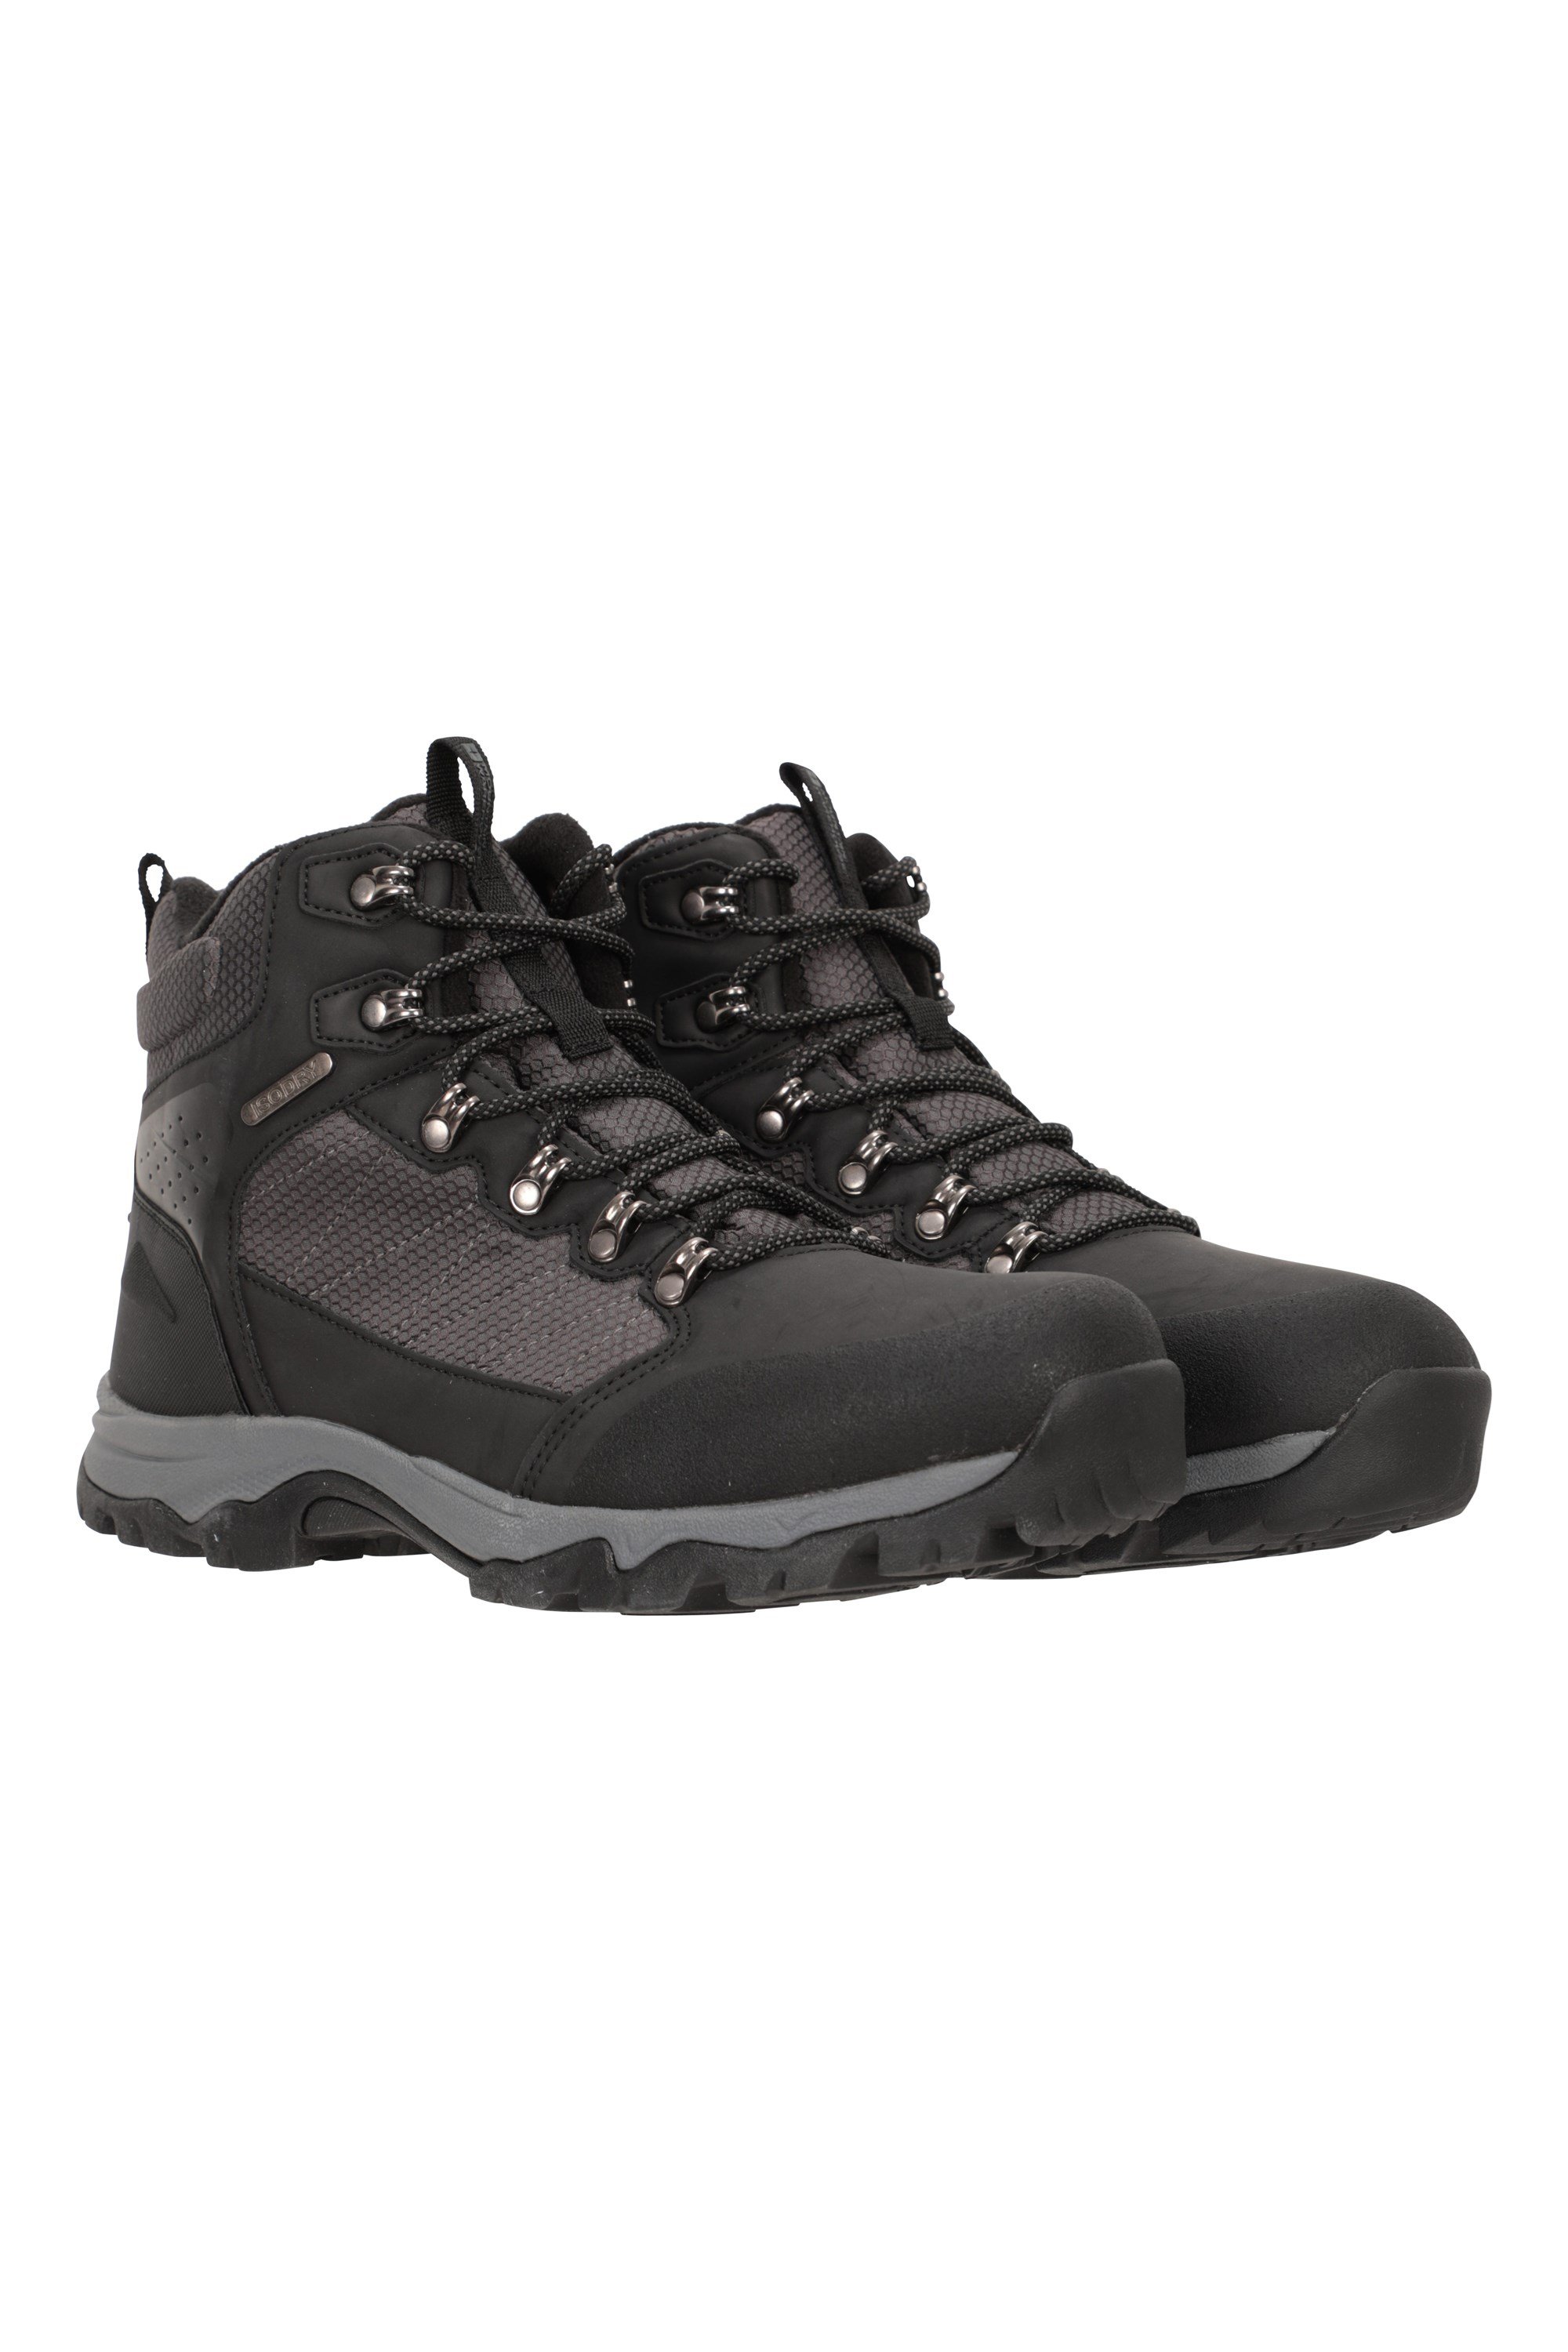 Mens Snow Boots & Winter Boots | Mountain Warehouse US